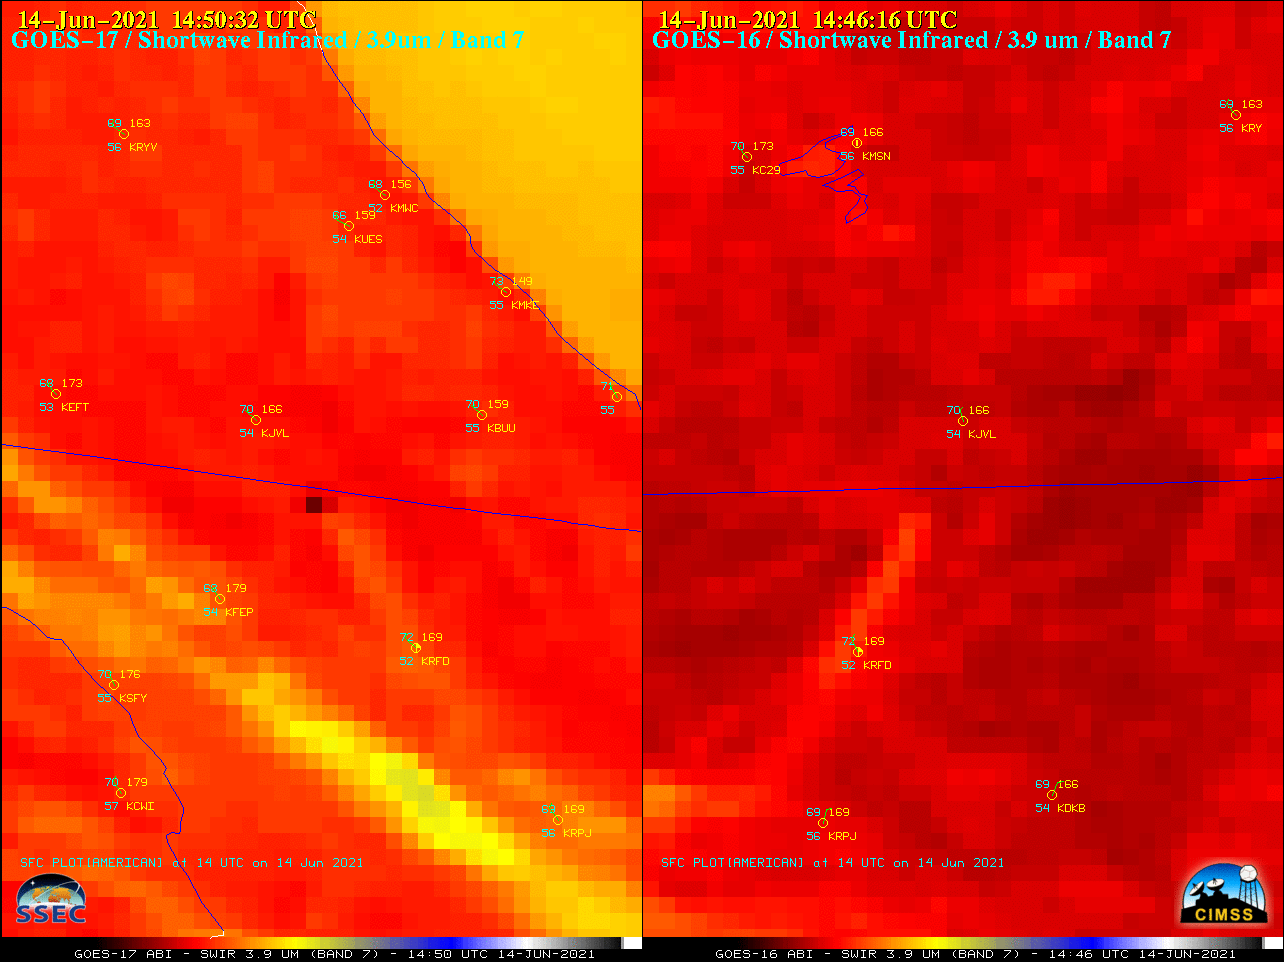 Shortwave Infrared (3.9 µm) images from GOES-17 (left) and GOES-16 (right) [click to play animation | MP4]